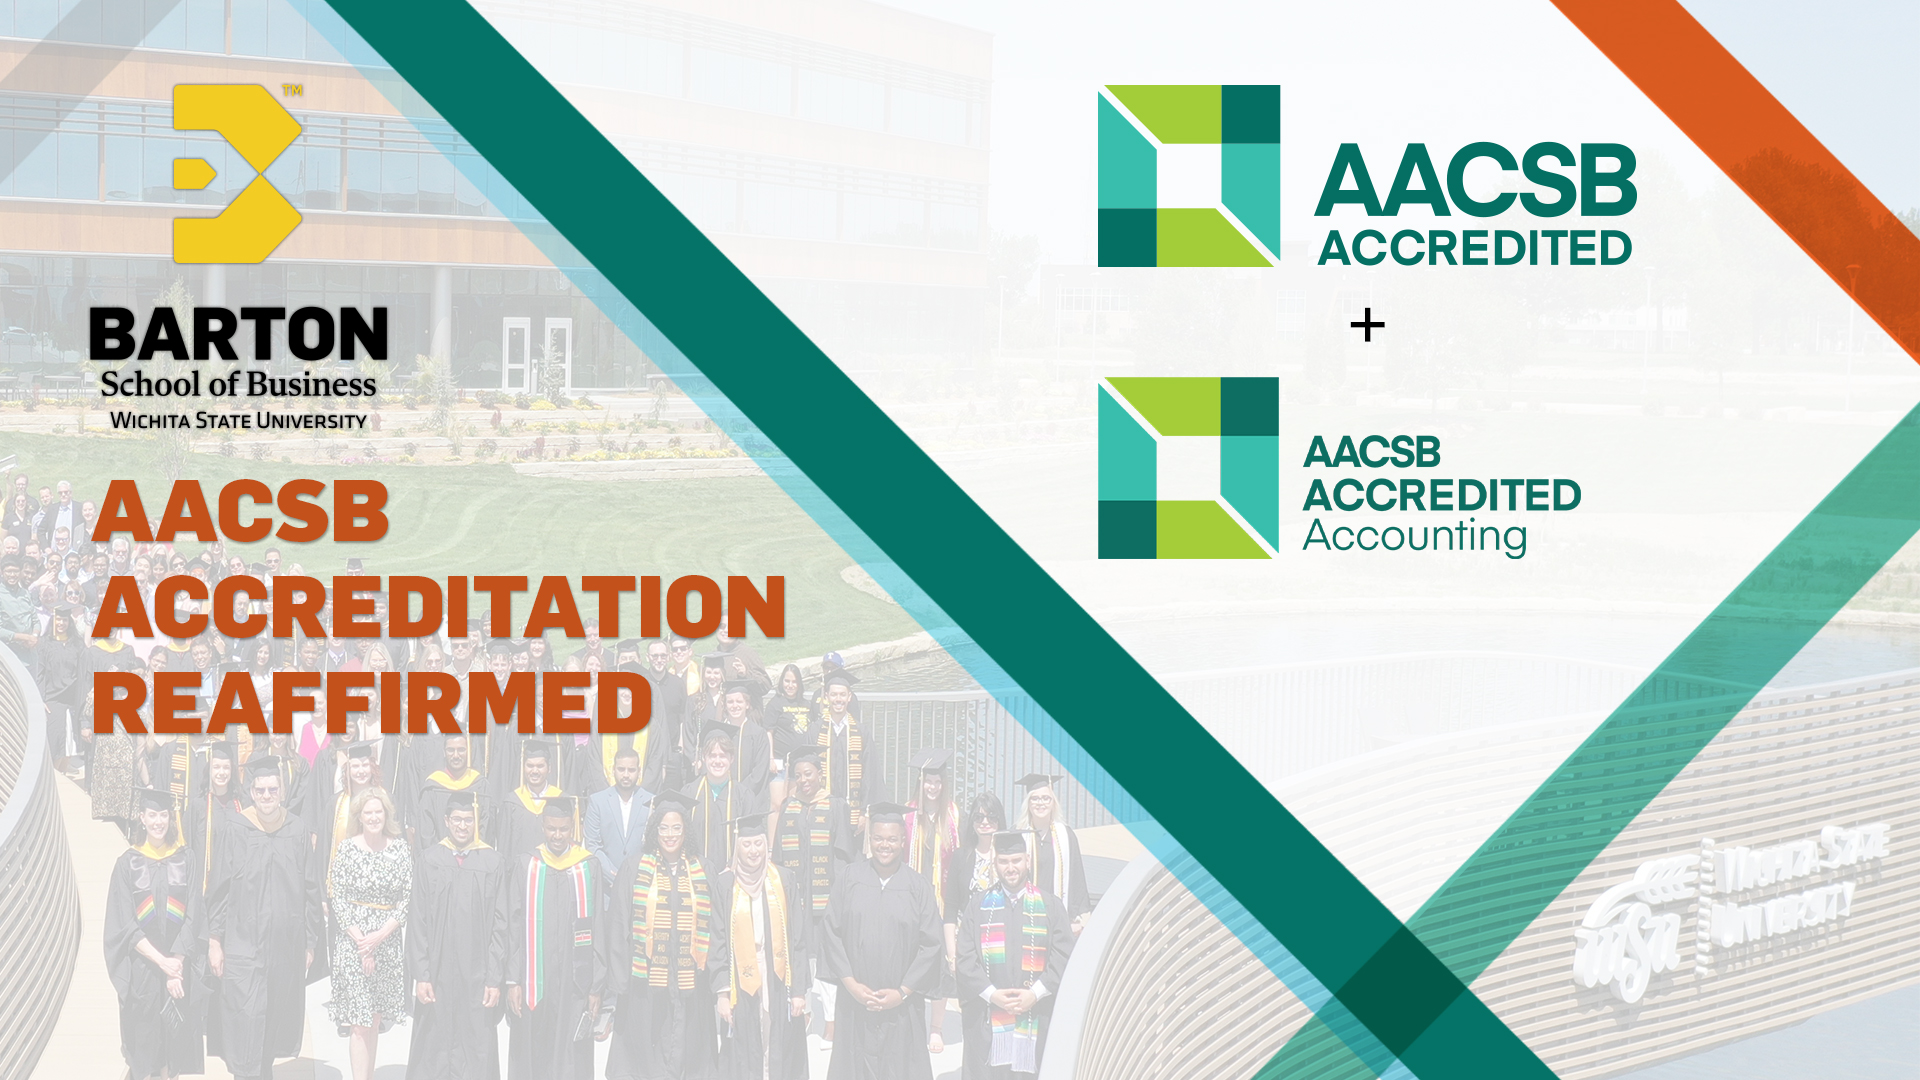 AACSB Reaffirms Double Accreditation for Barton School of Business